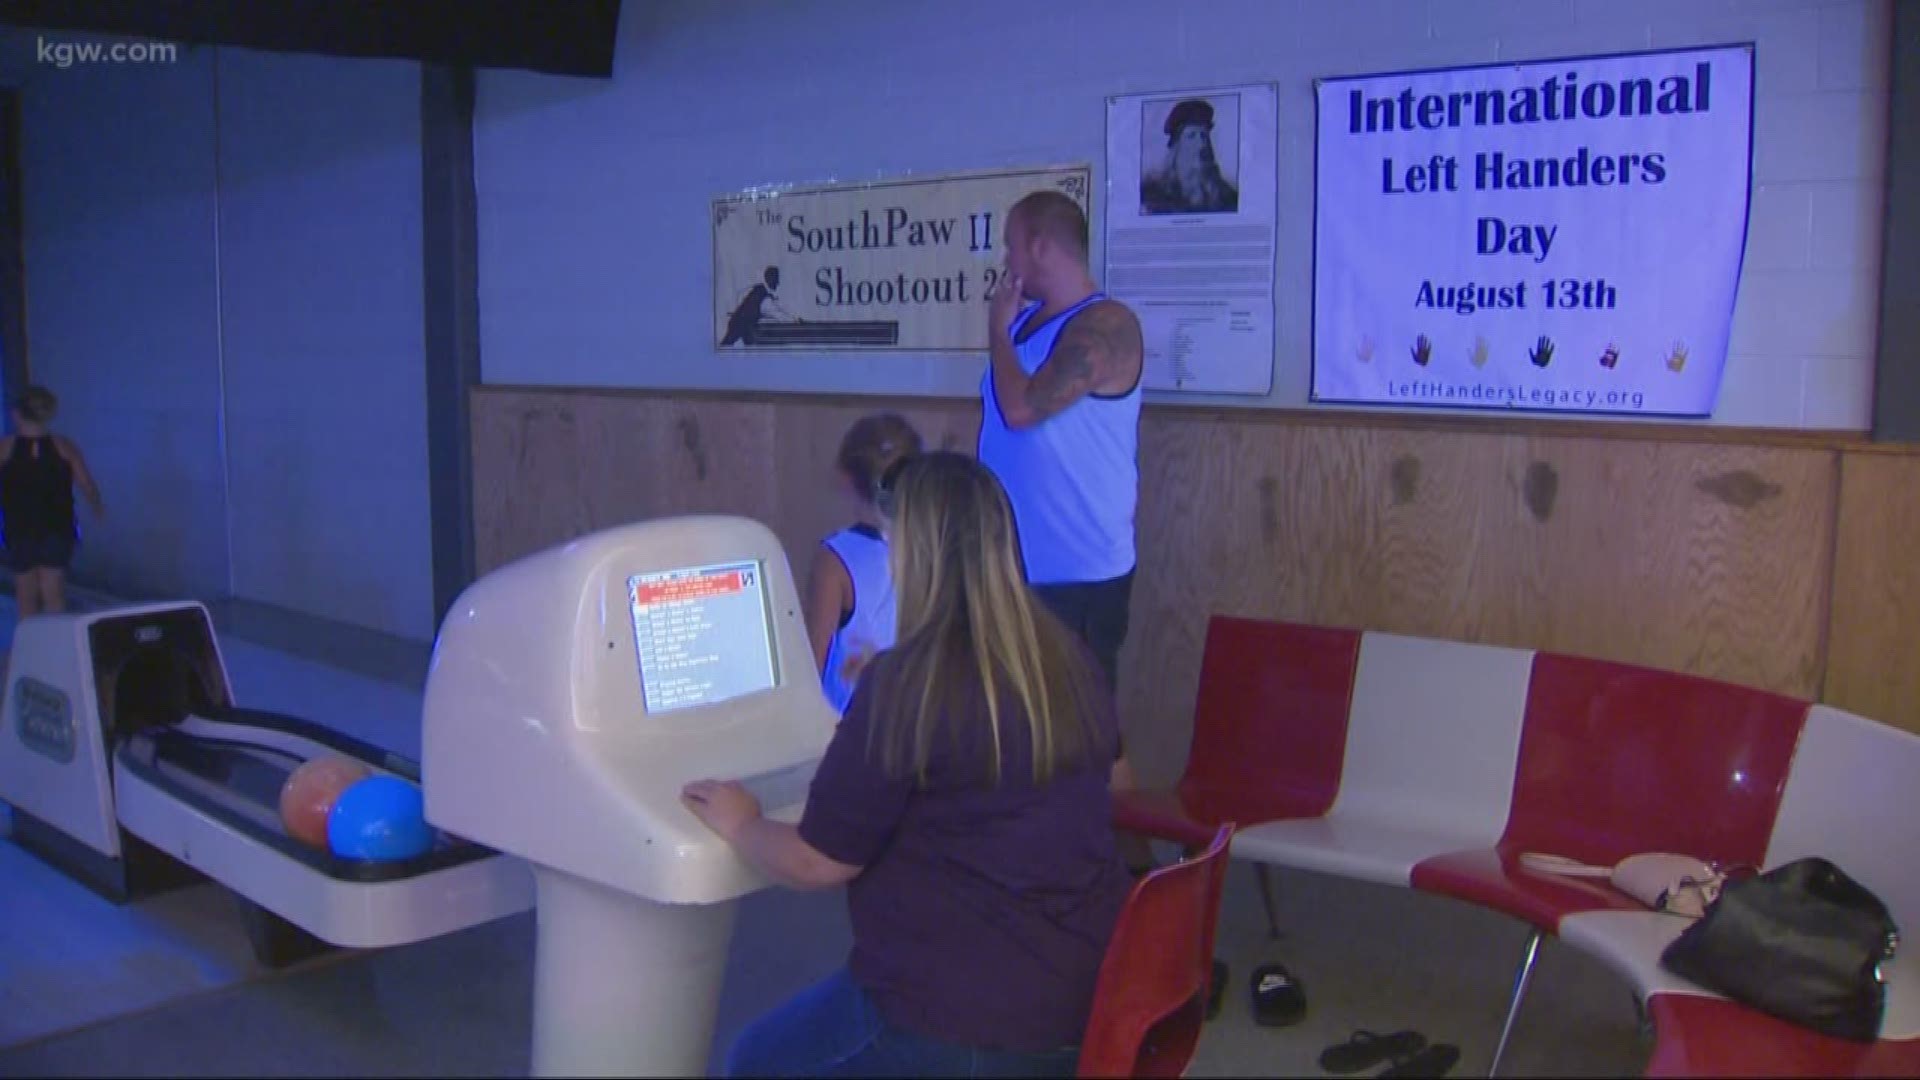 There was a one-of-a-kind bowling tournament in Milwaukie, Oregon on Sunday.